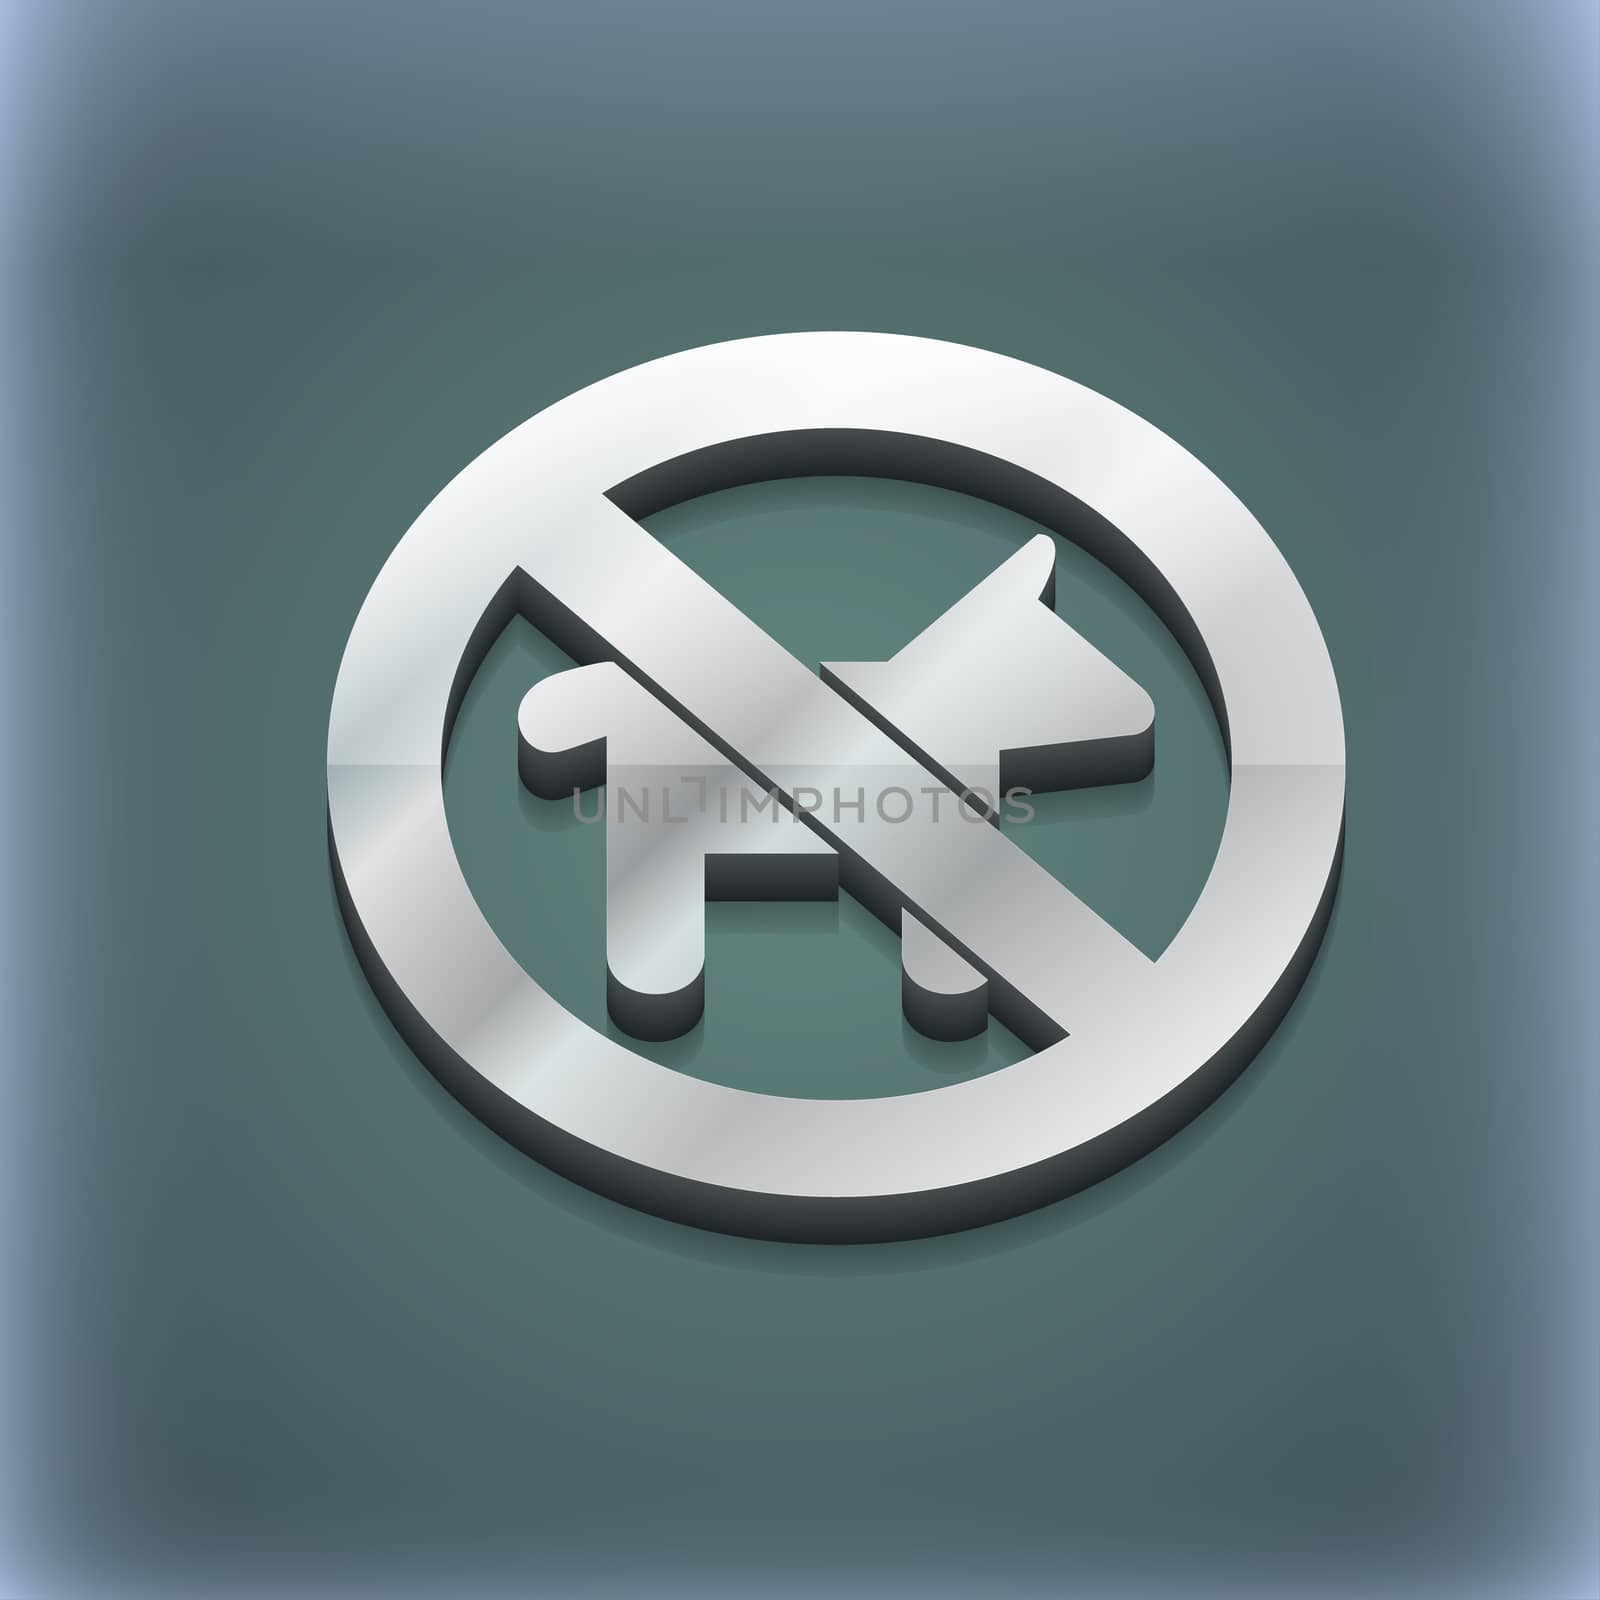 dog walking is prohibited icon symbol. 3D style. Trendy, modern design with space for your text illustration. Raster version